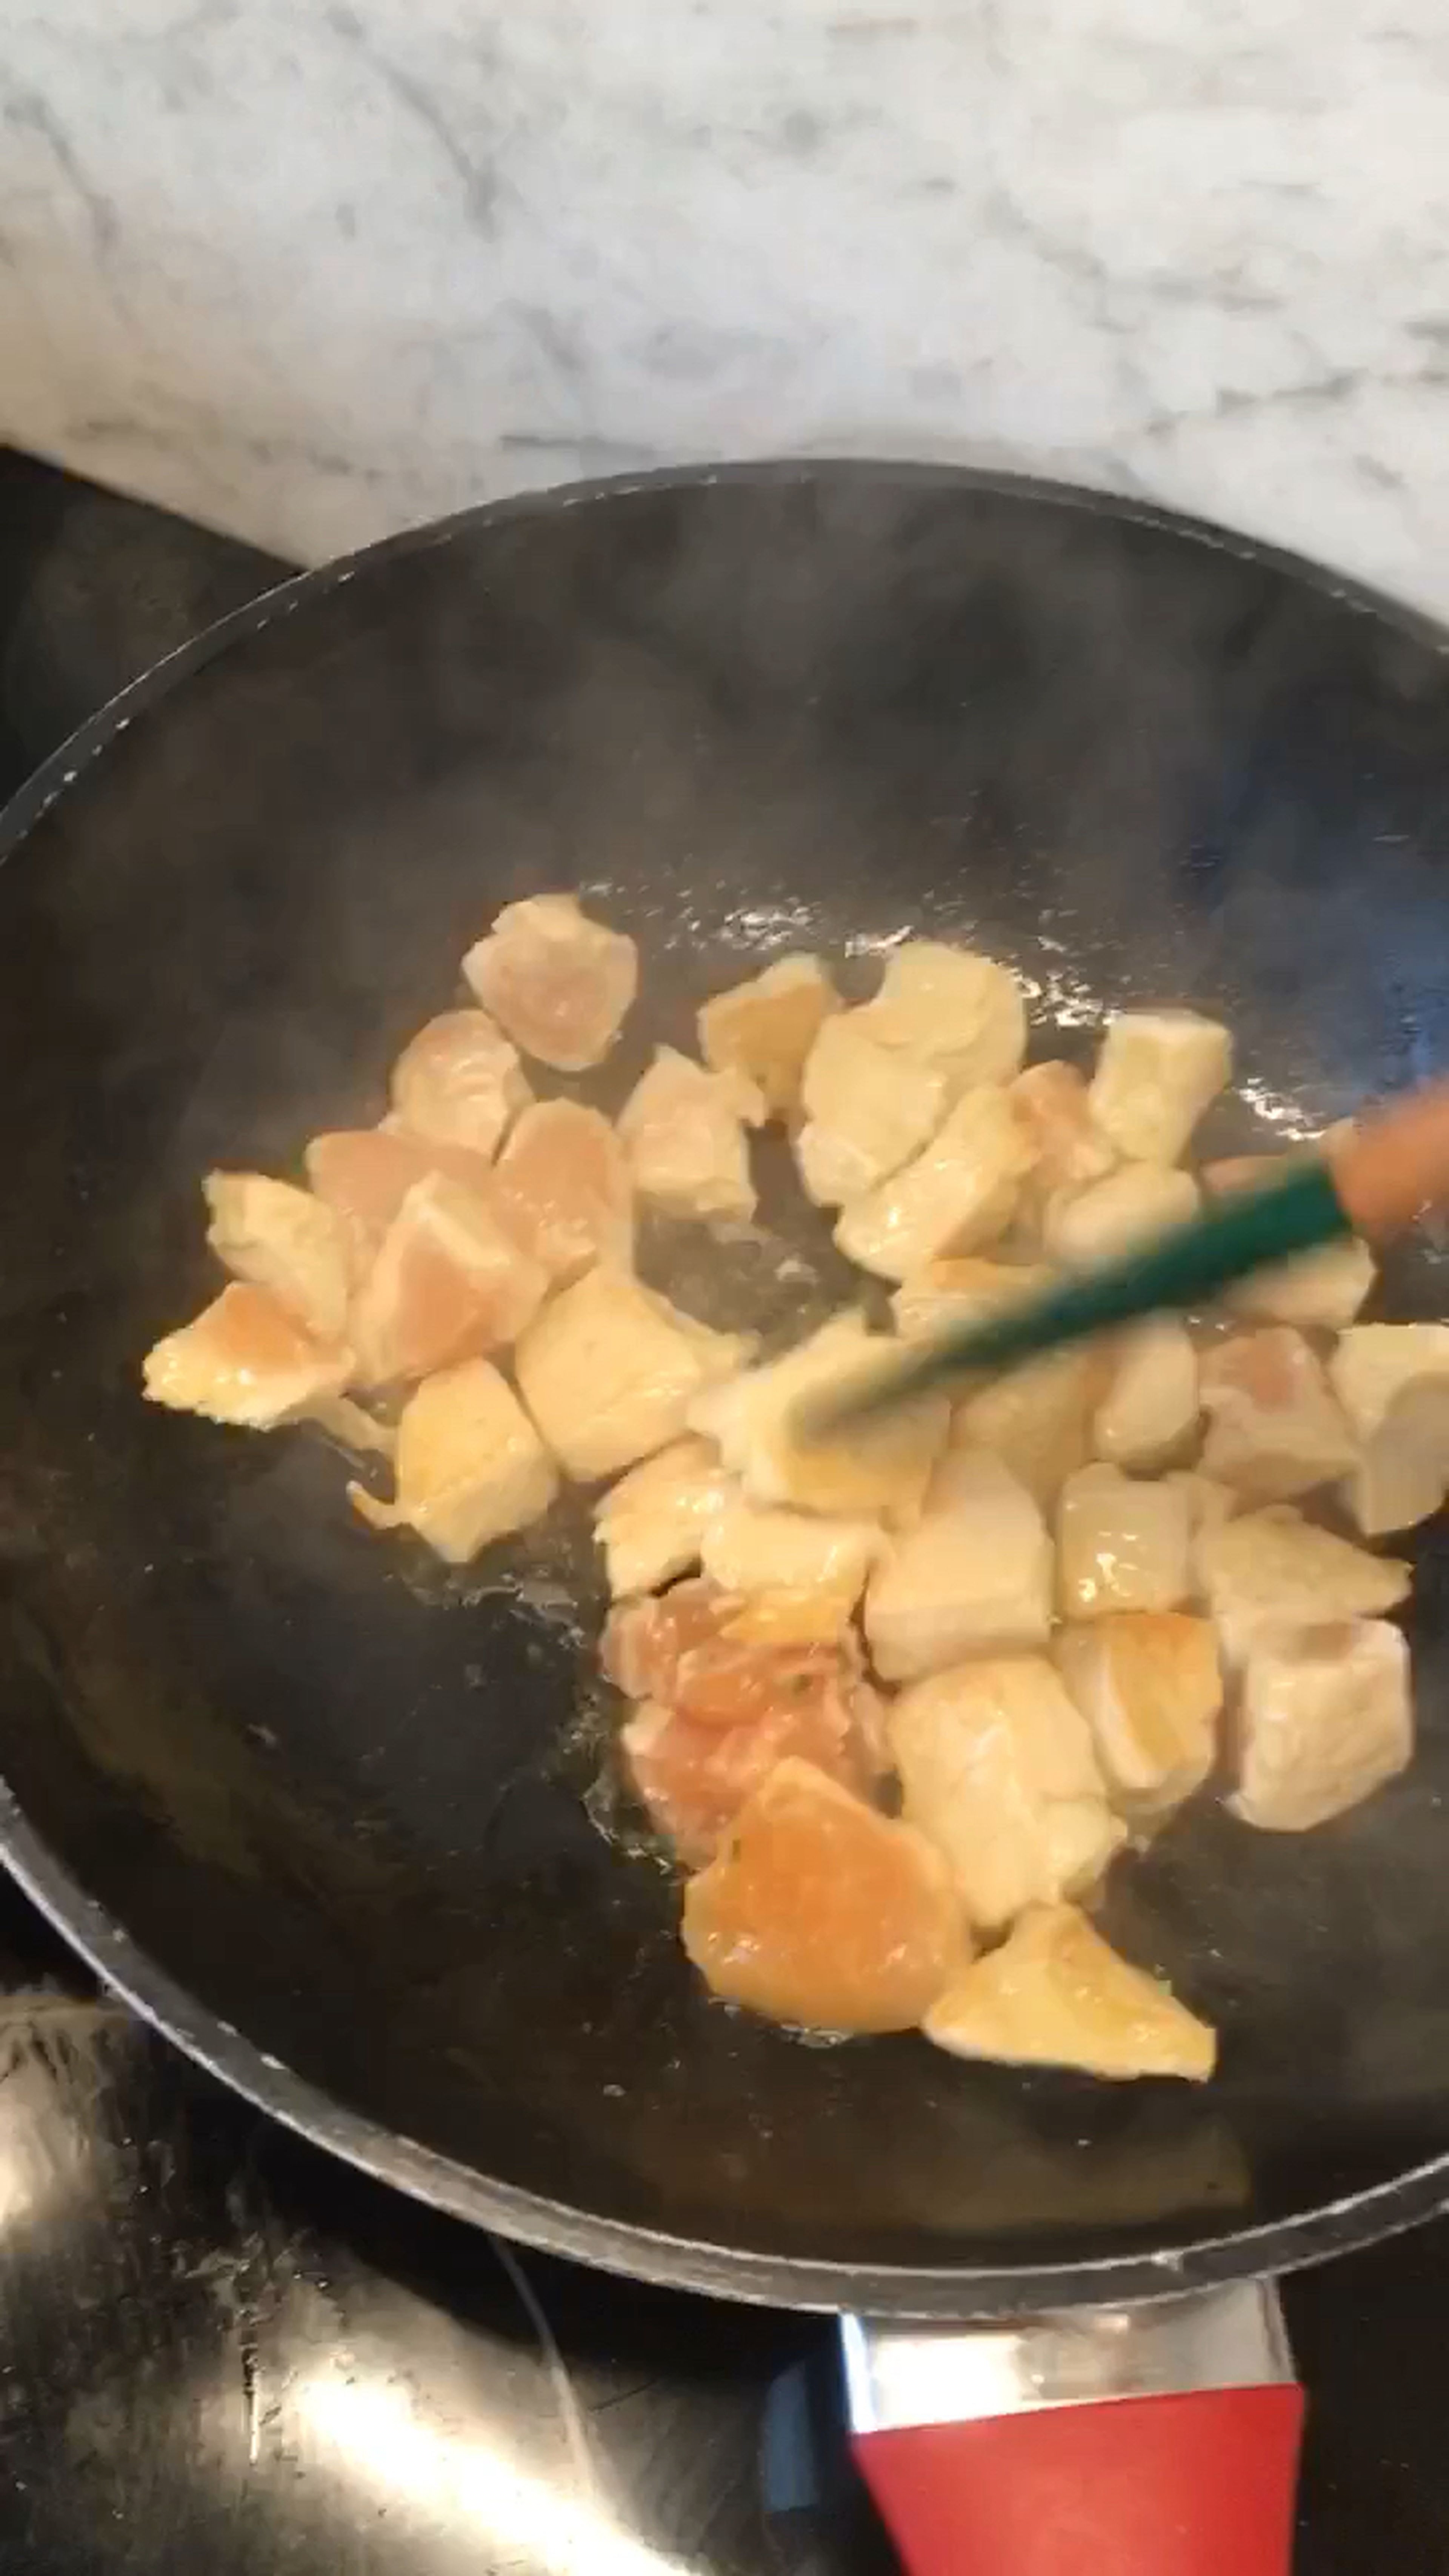 Put the remaining oil from the pan into a large wok and fry the chicken breasts on all sides.